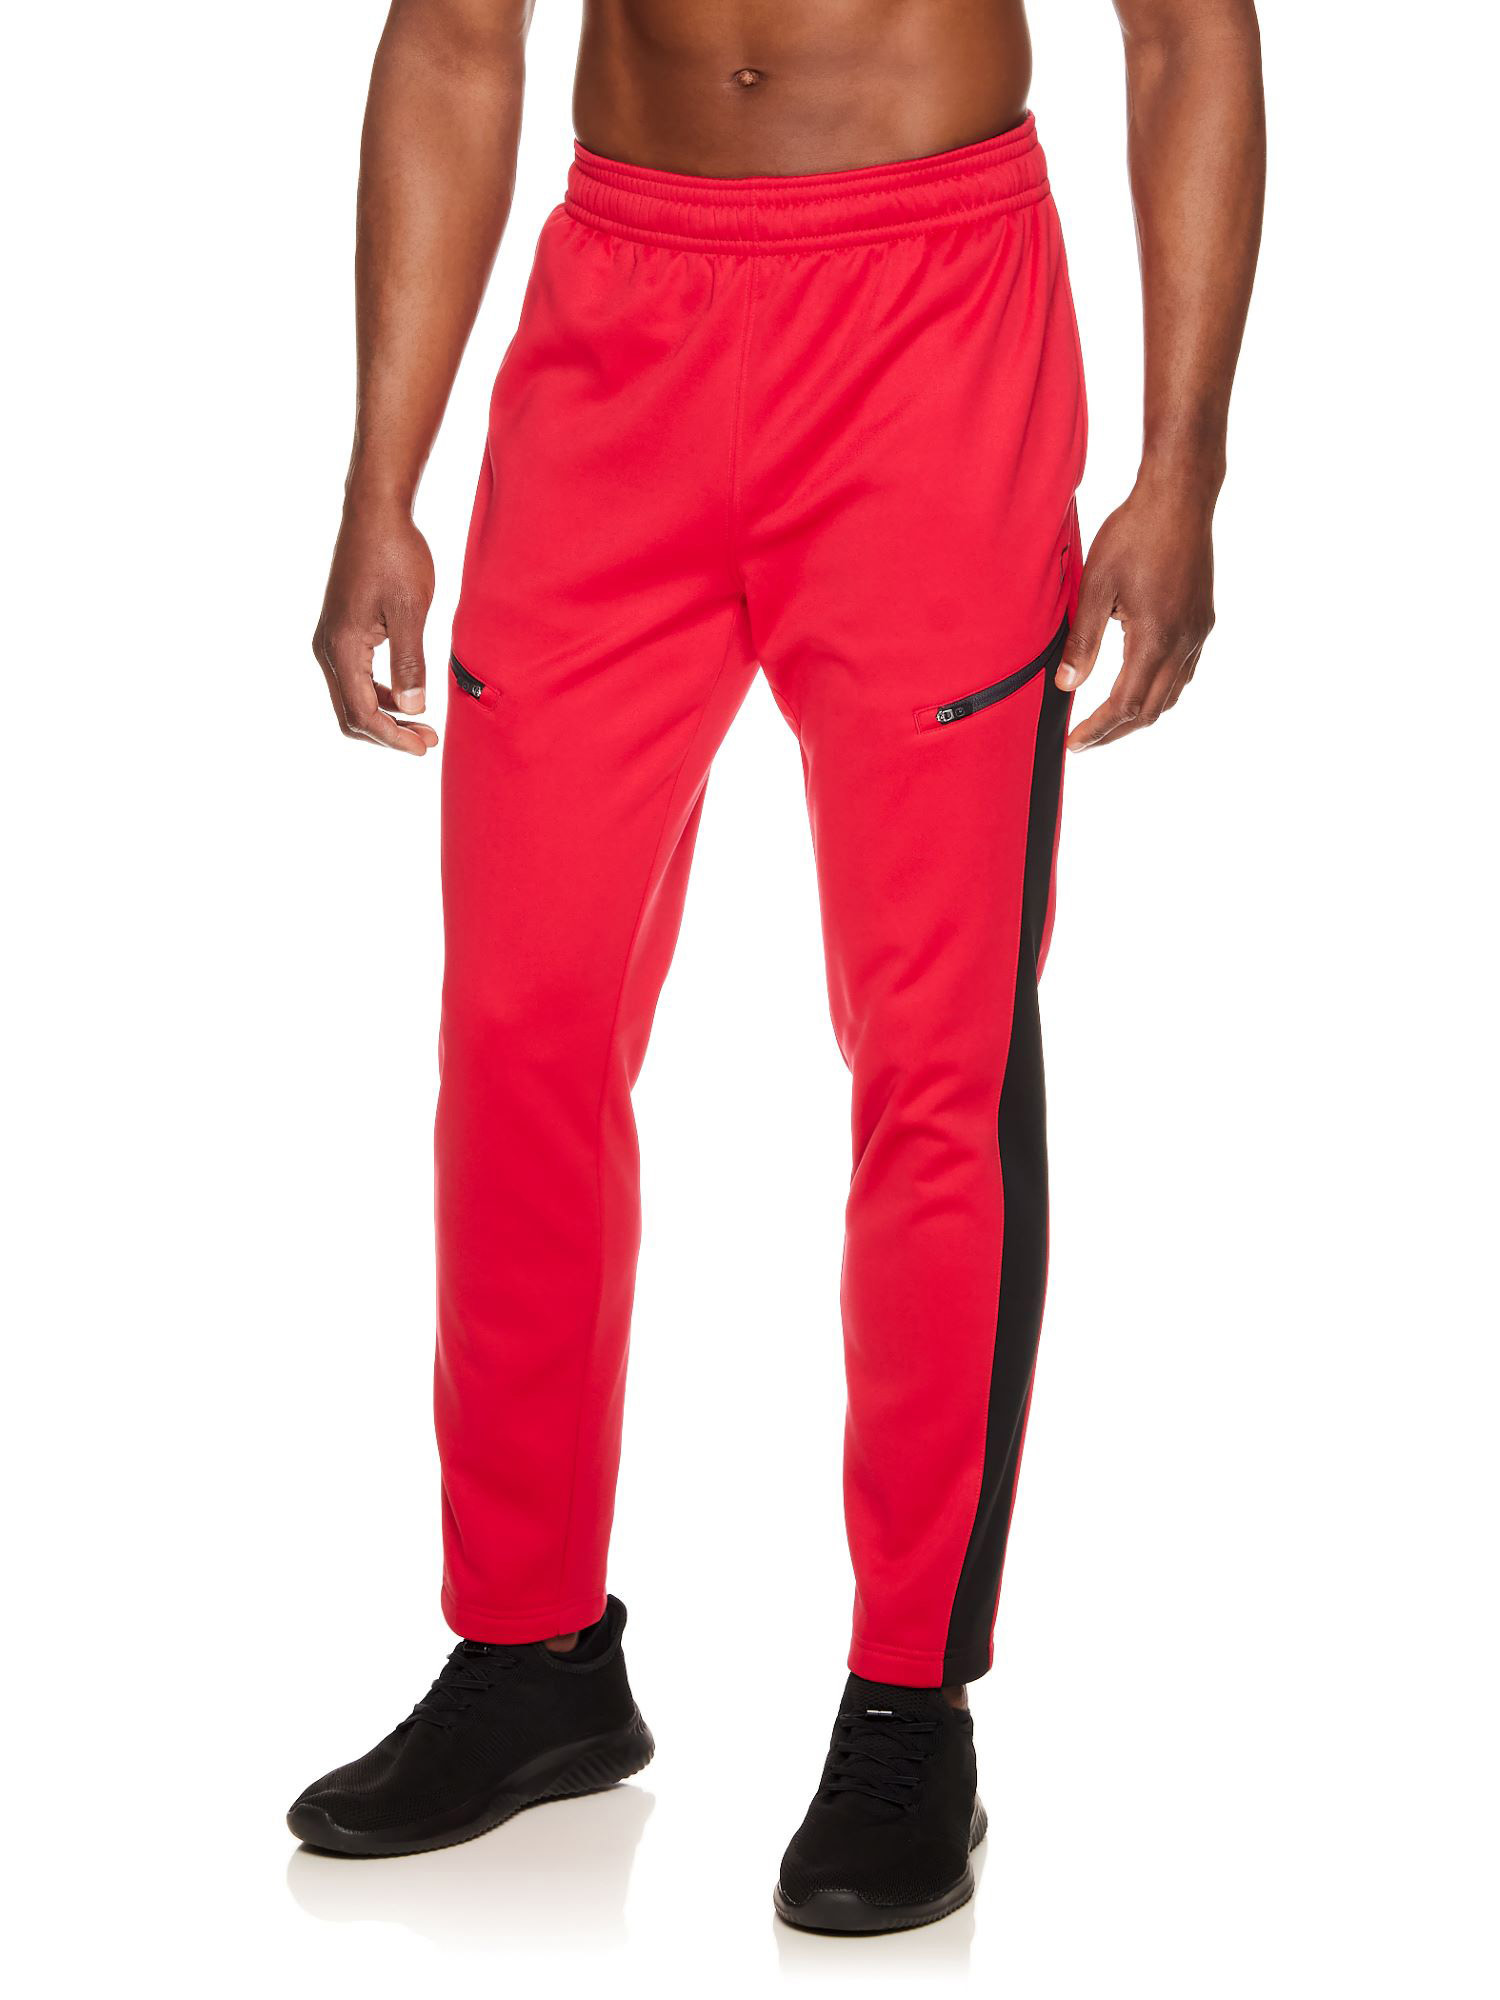 And1 Men's and Big Men's Deflection Pants, Sizes S-5X - image 1 of 4